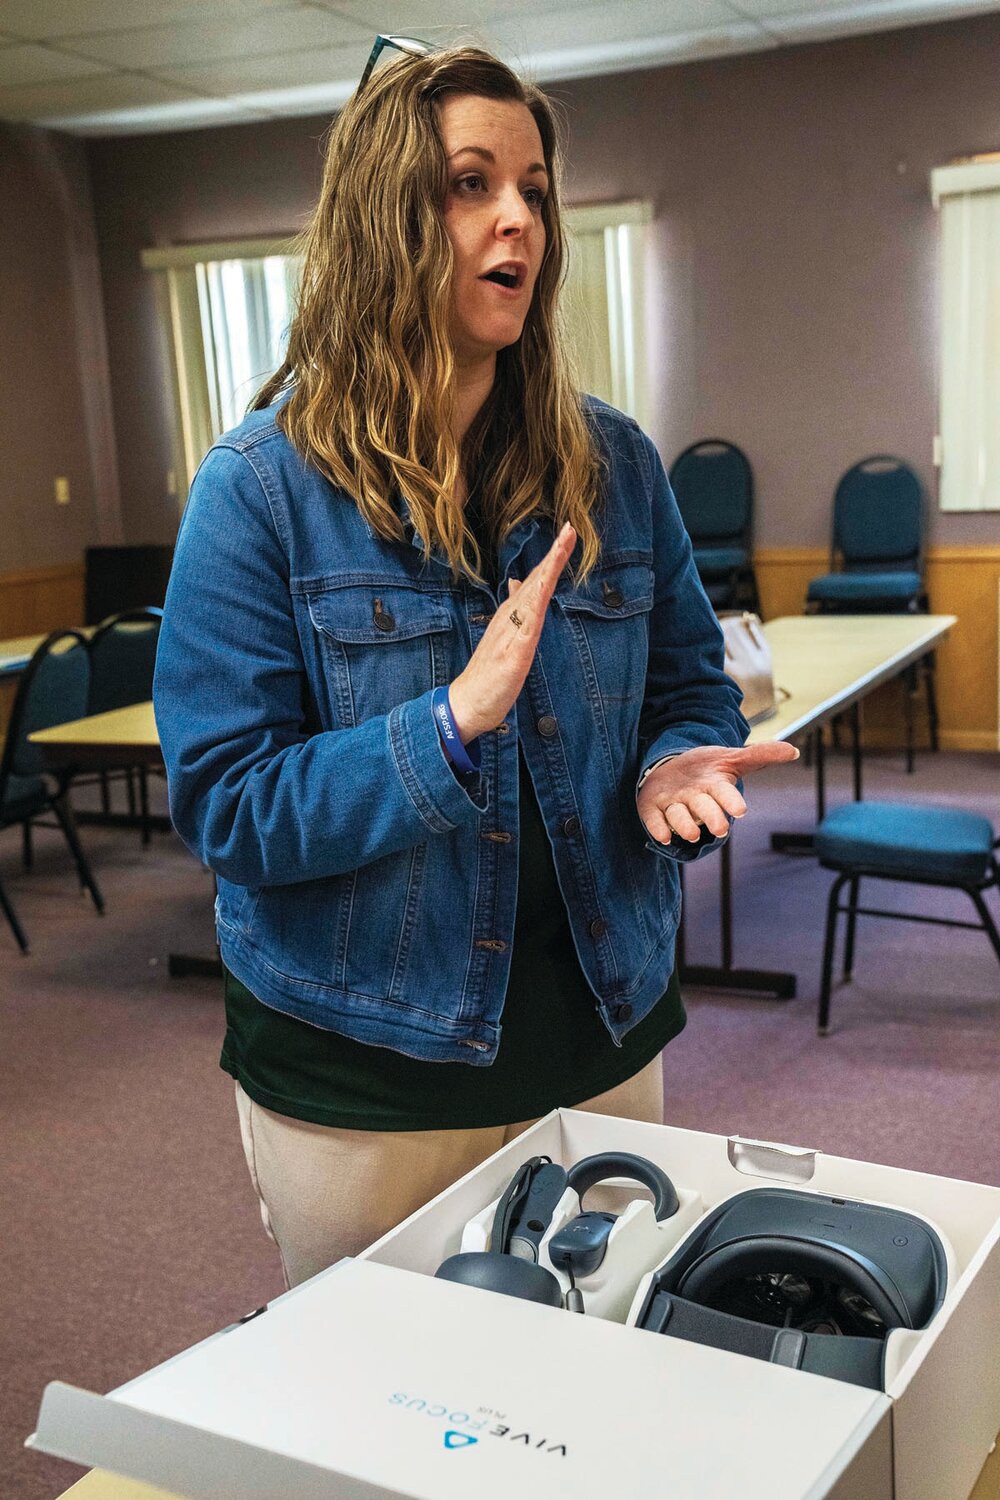 Lenape Valley Foundation’s Nicole Wolf, co-chair of the Bucks County Crisis Intervention Team Task Force, instructs law enforcement officials from across the county who gathered May 18 to test out virtual reality headsets as part of their Crisis Intervention Team certification training.